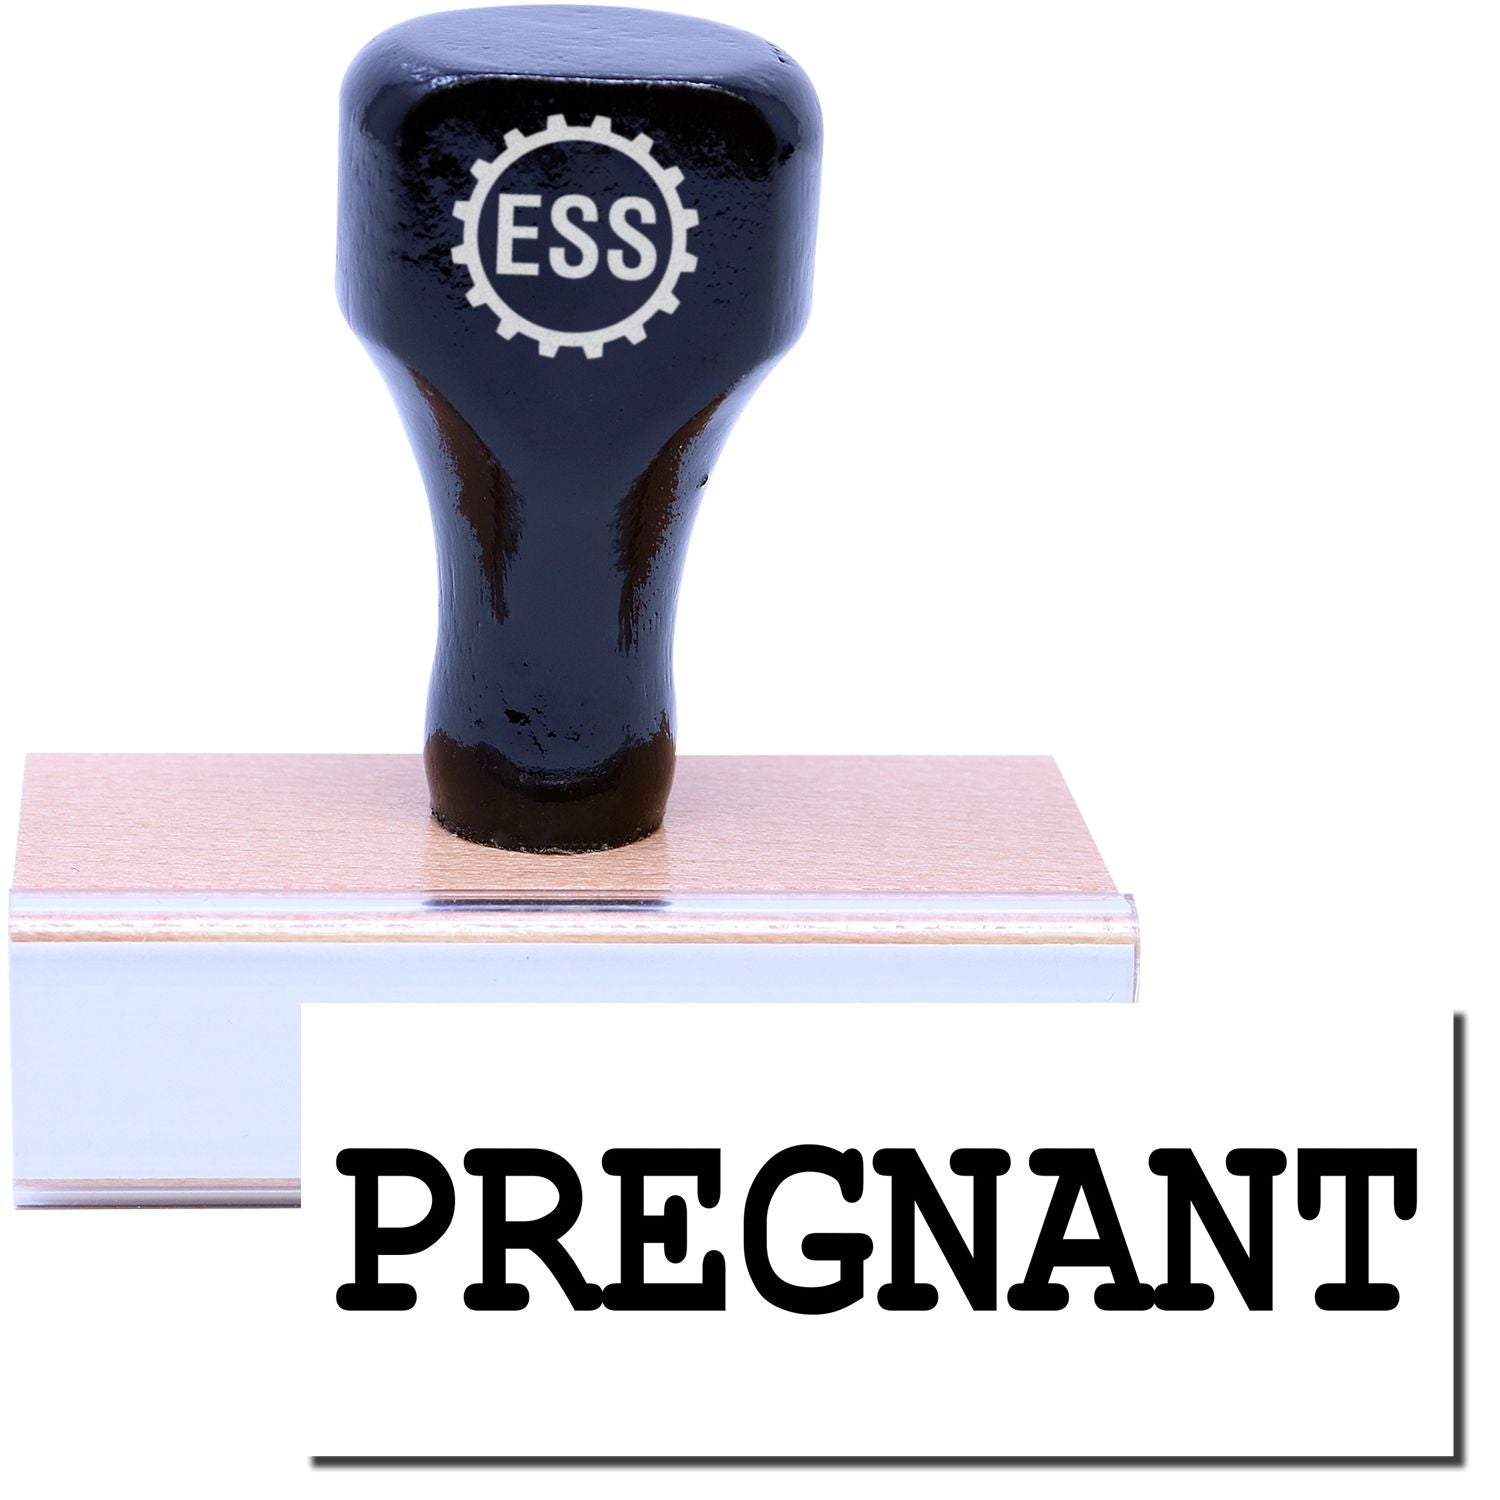 A stock office rubber stamp with a stamped image showing how the text "PREGNANT" is displayed after stamping.